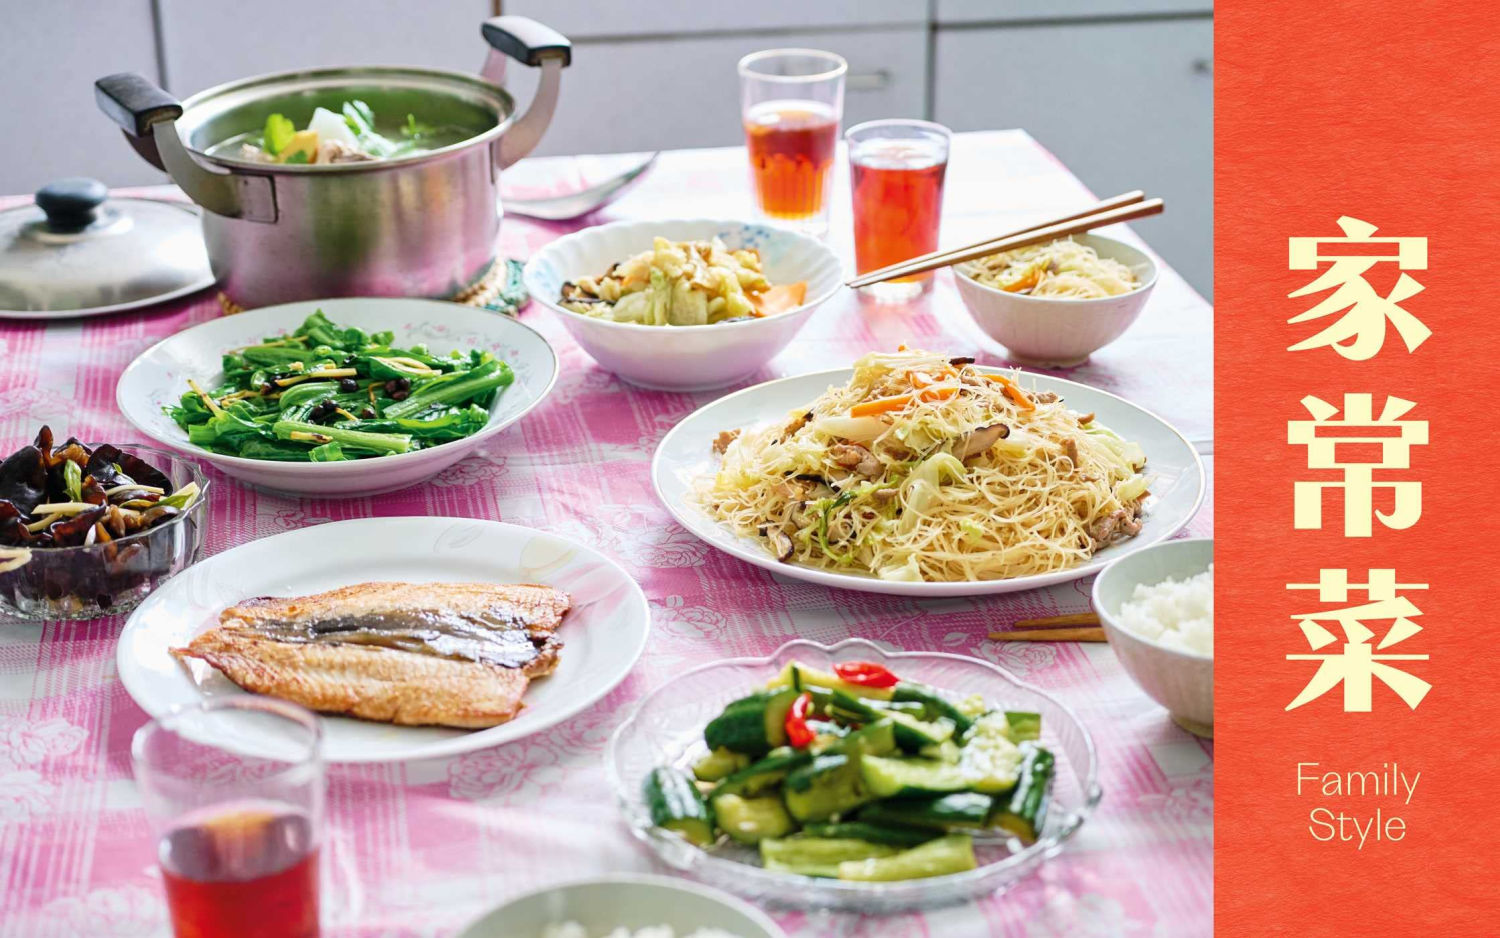 Made in Taiwan: Recipes and Stories from the Island Nation / CLARISSA WEI - COMING SEPT. 19TH